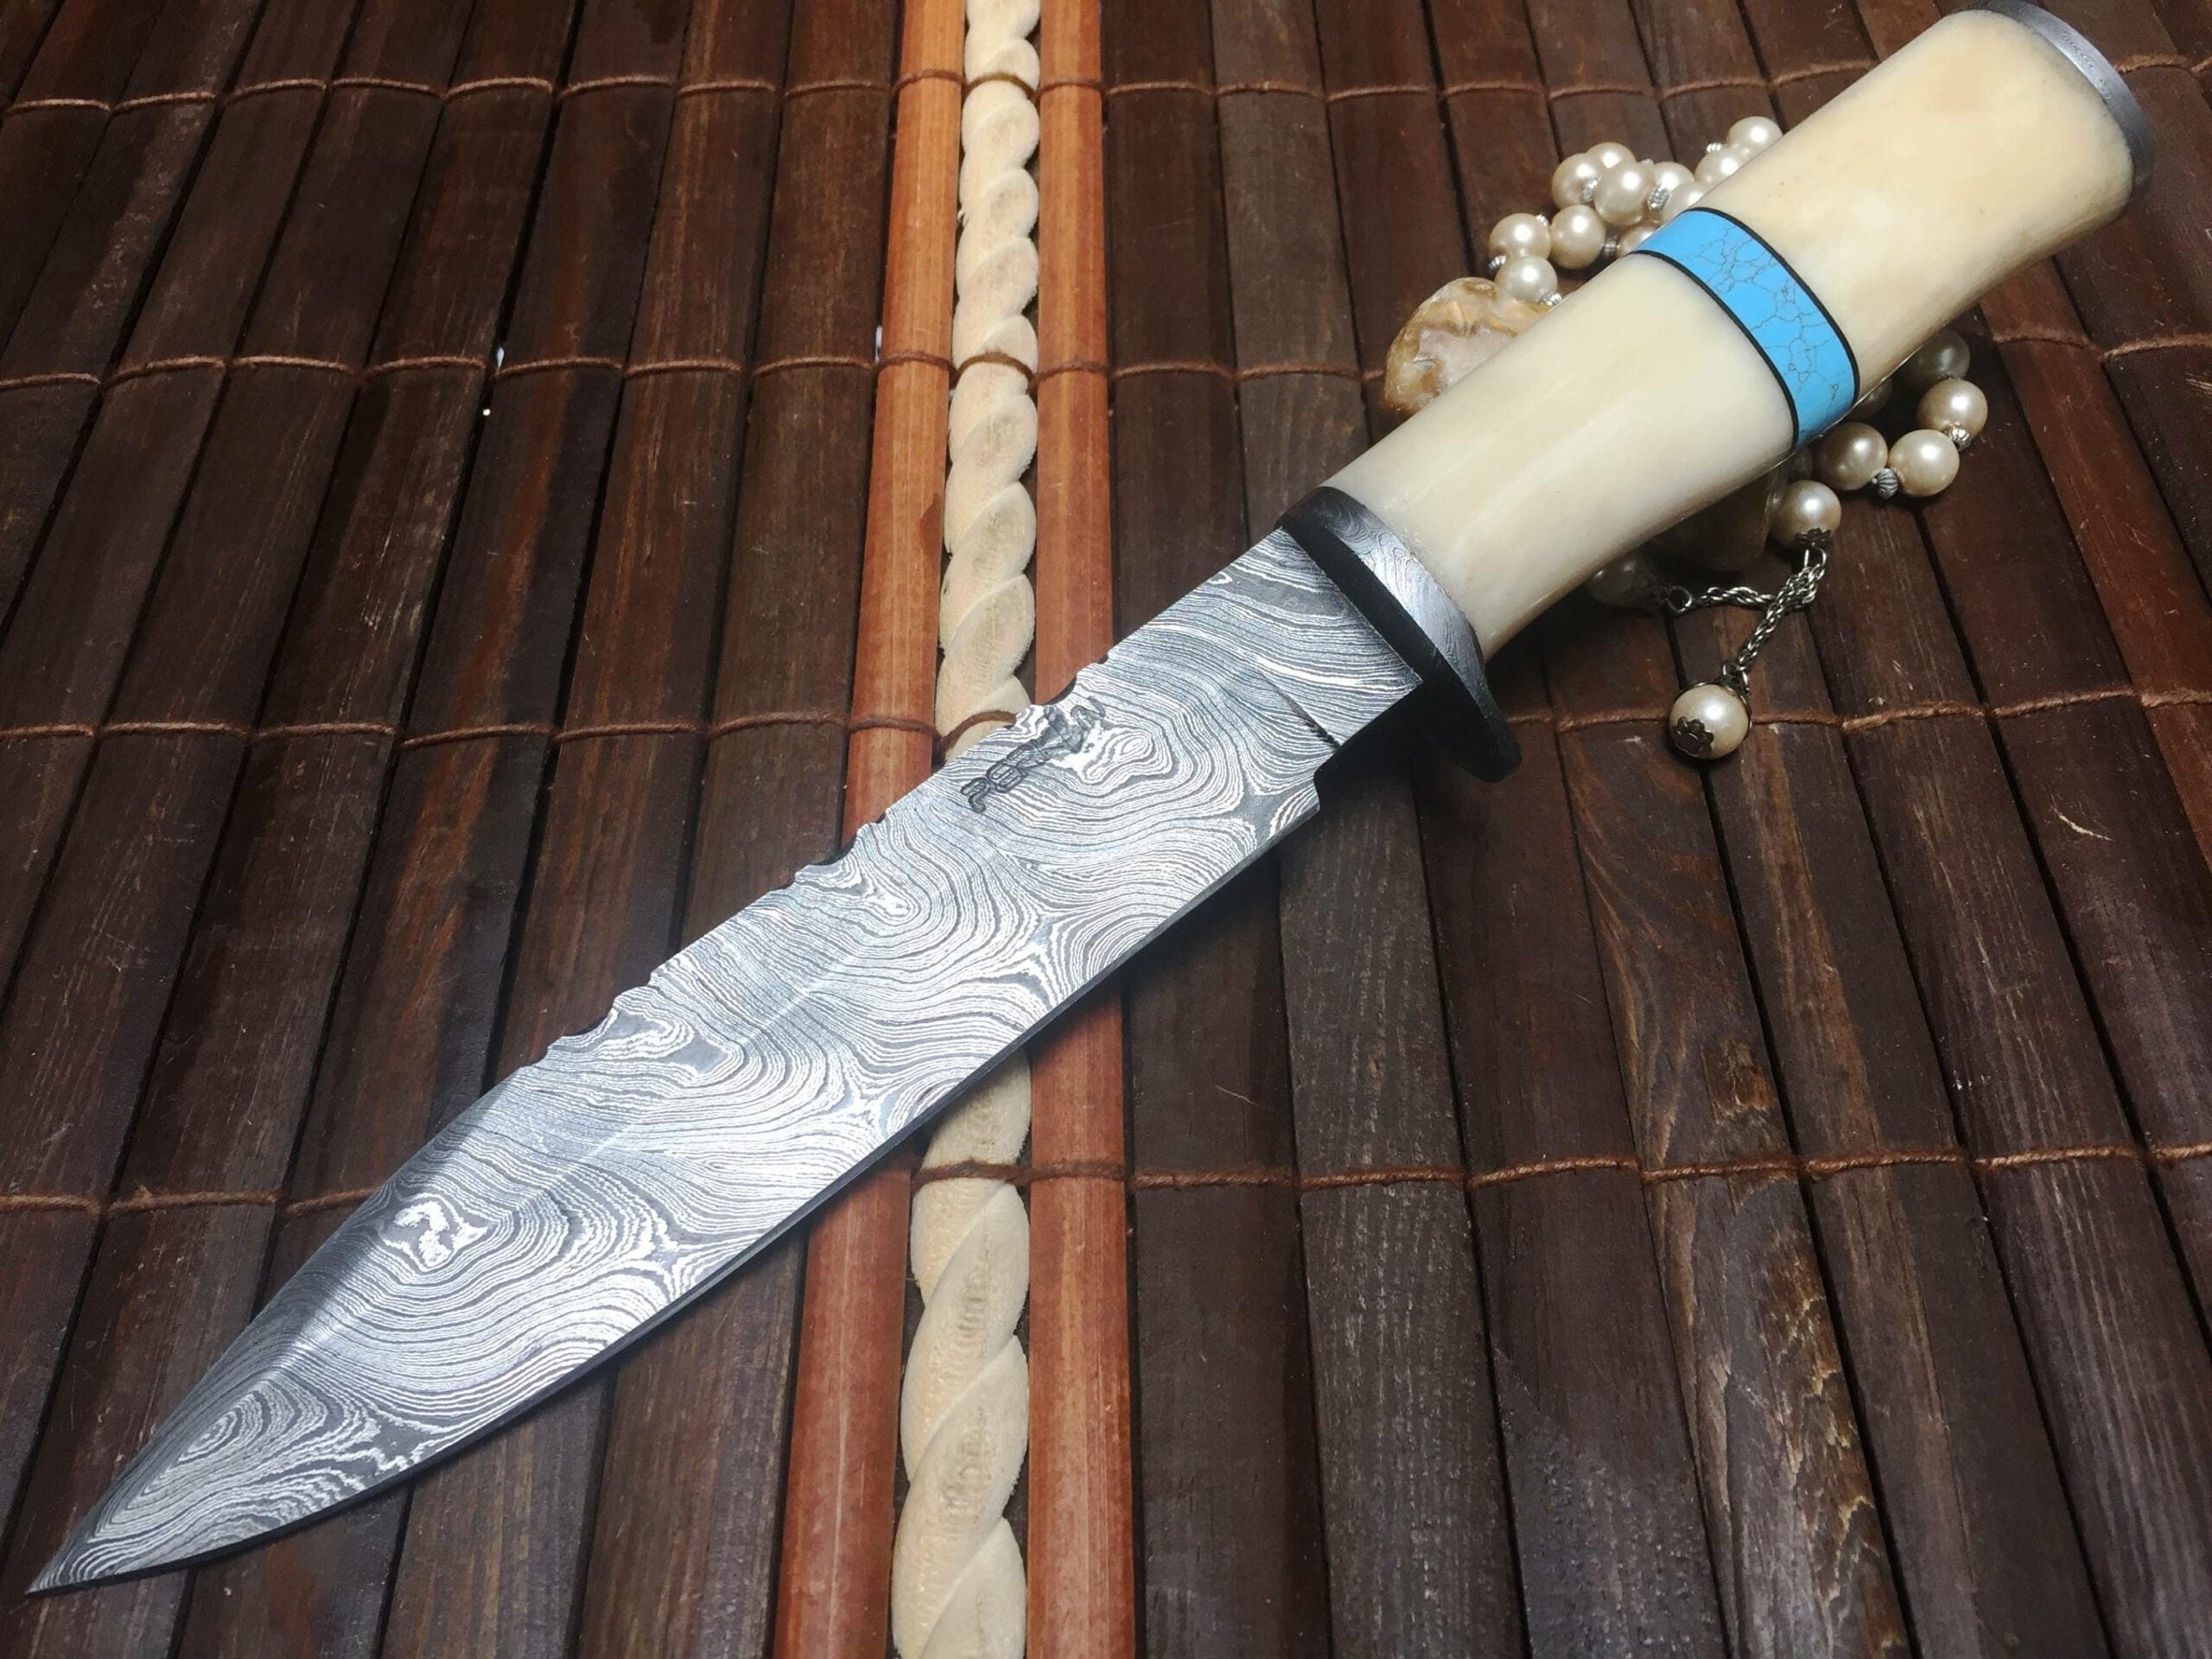 12 Inches Damascus Steel Hunting Knife - Beautiful Bowie Knife by Vicky